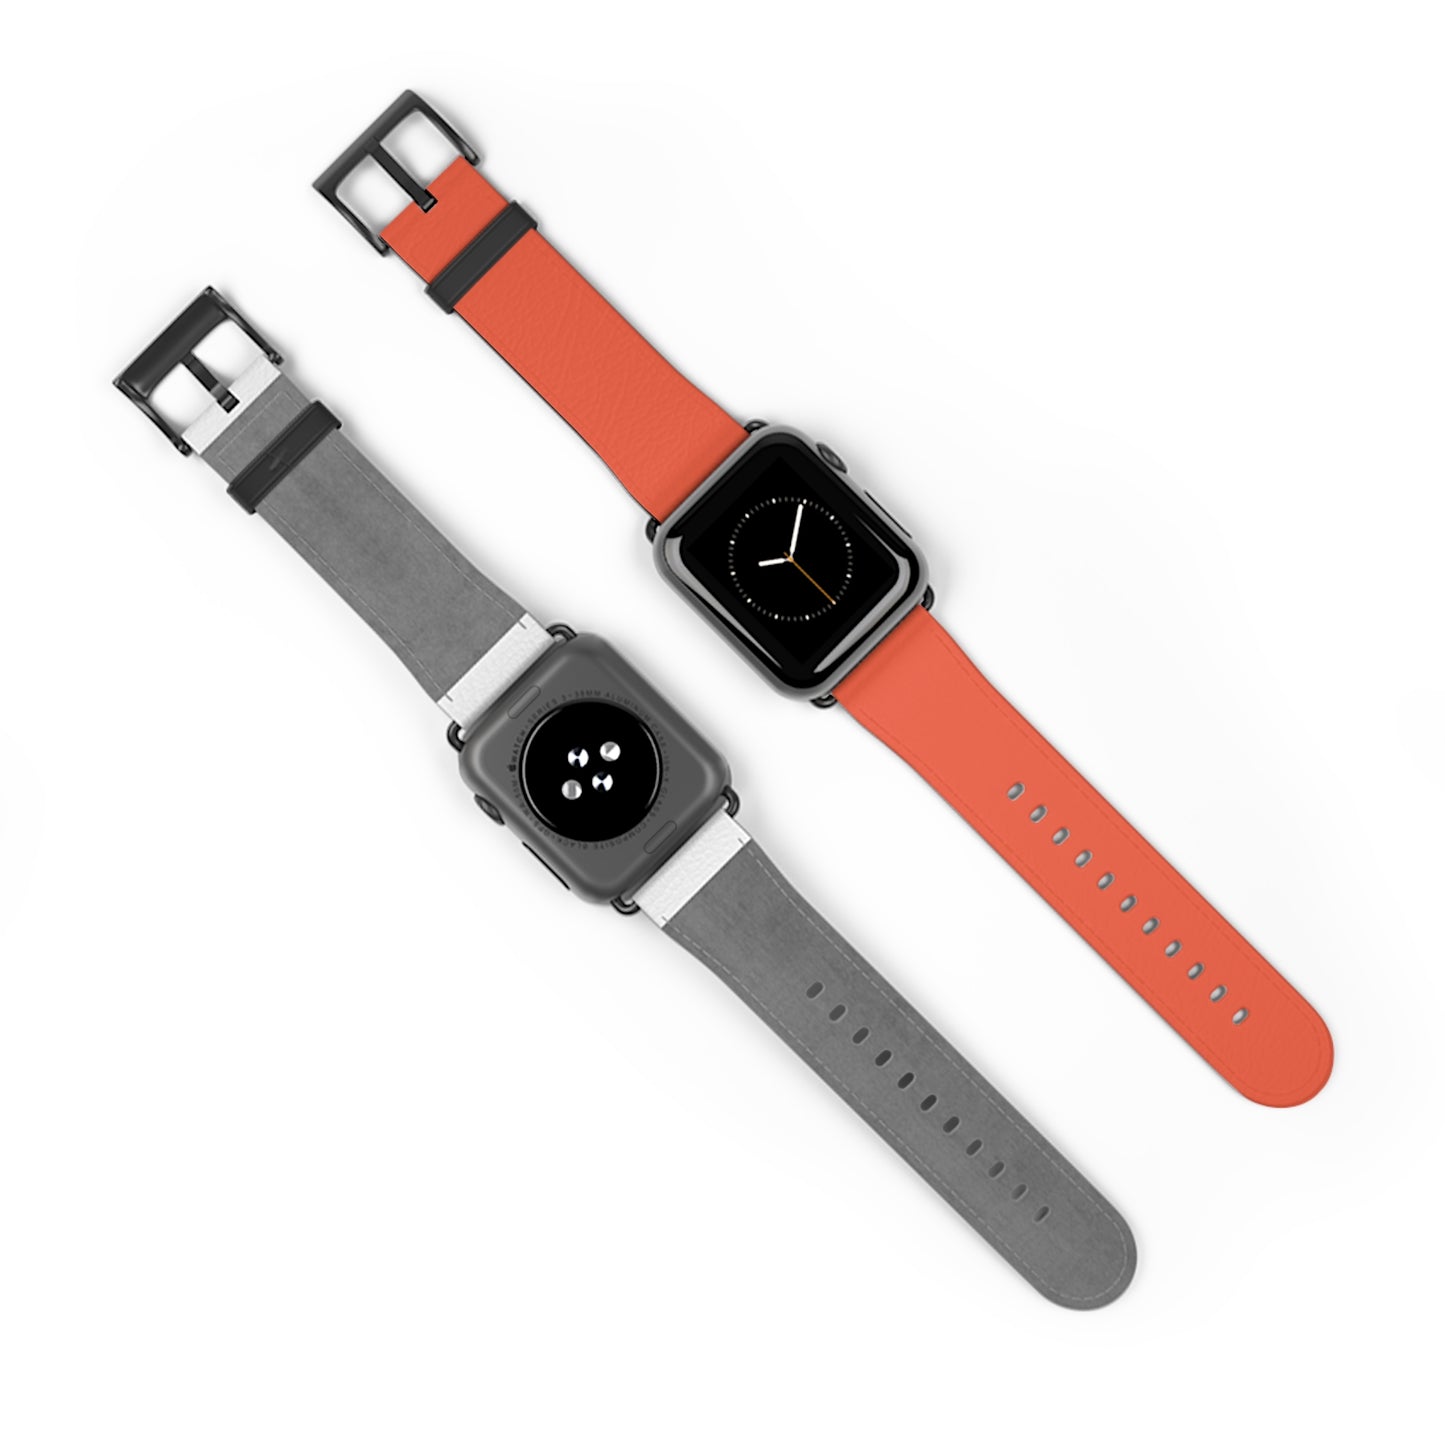 RED APPLE® WATCH BAND- PANTONE® 171